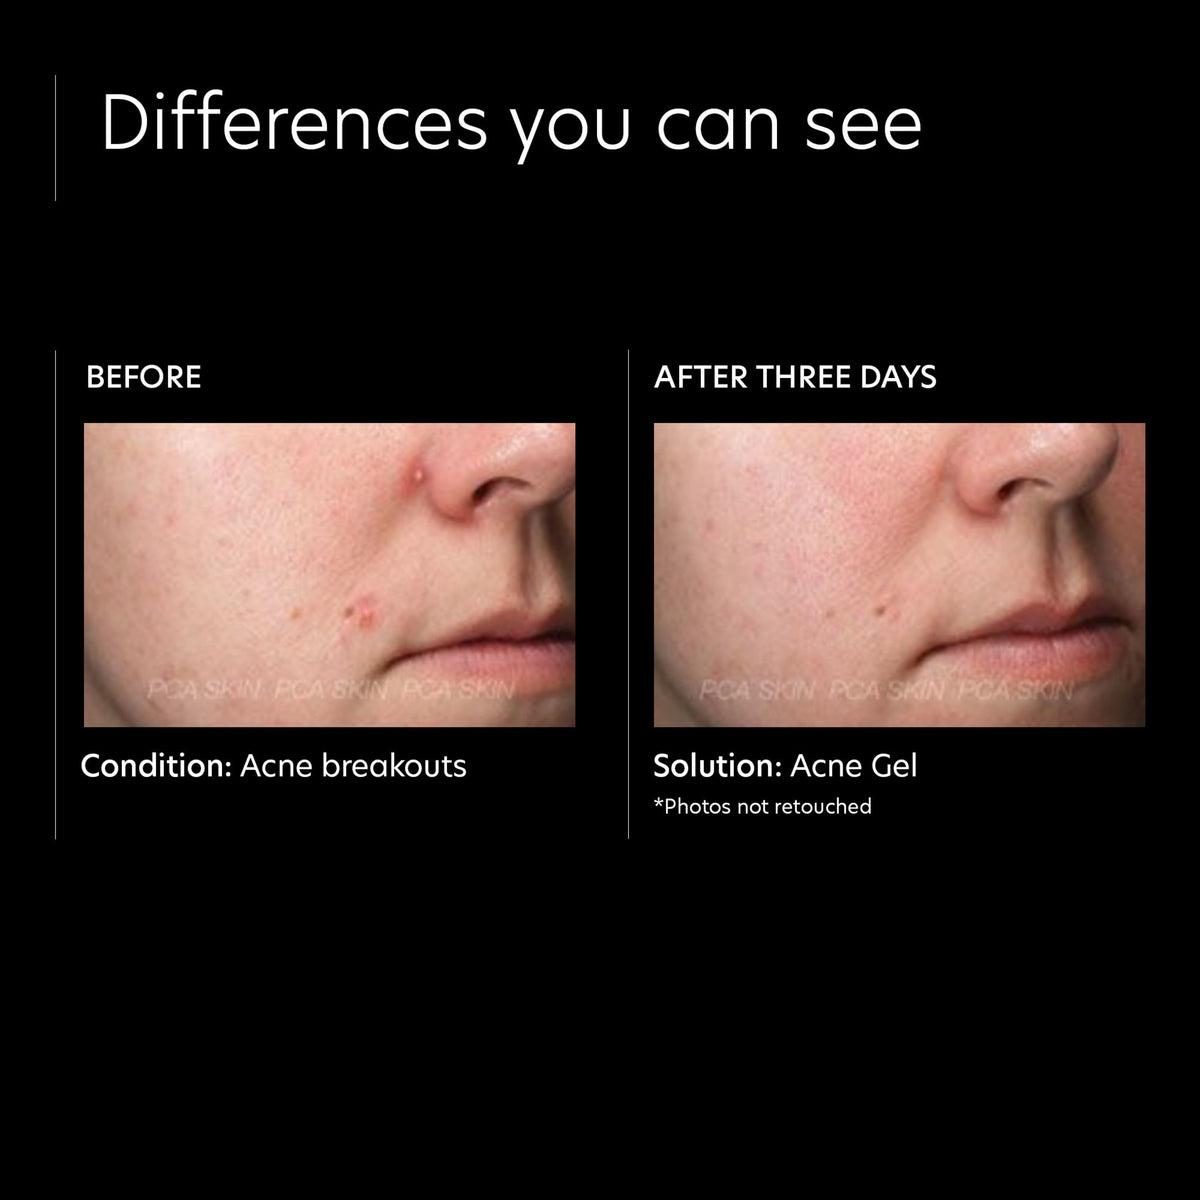 PCA Skin Acne Gel With OmniSome .